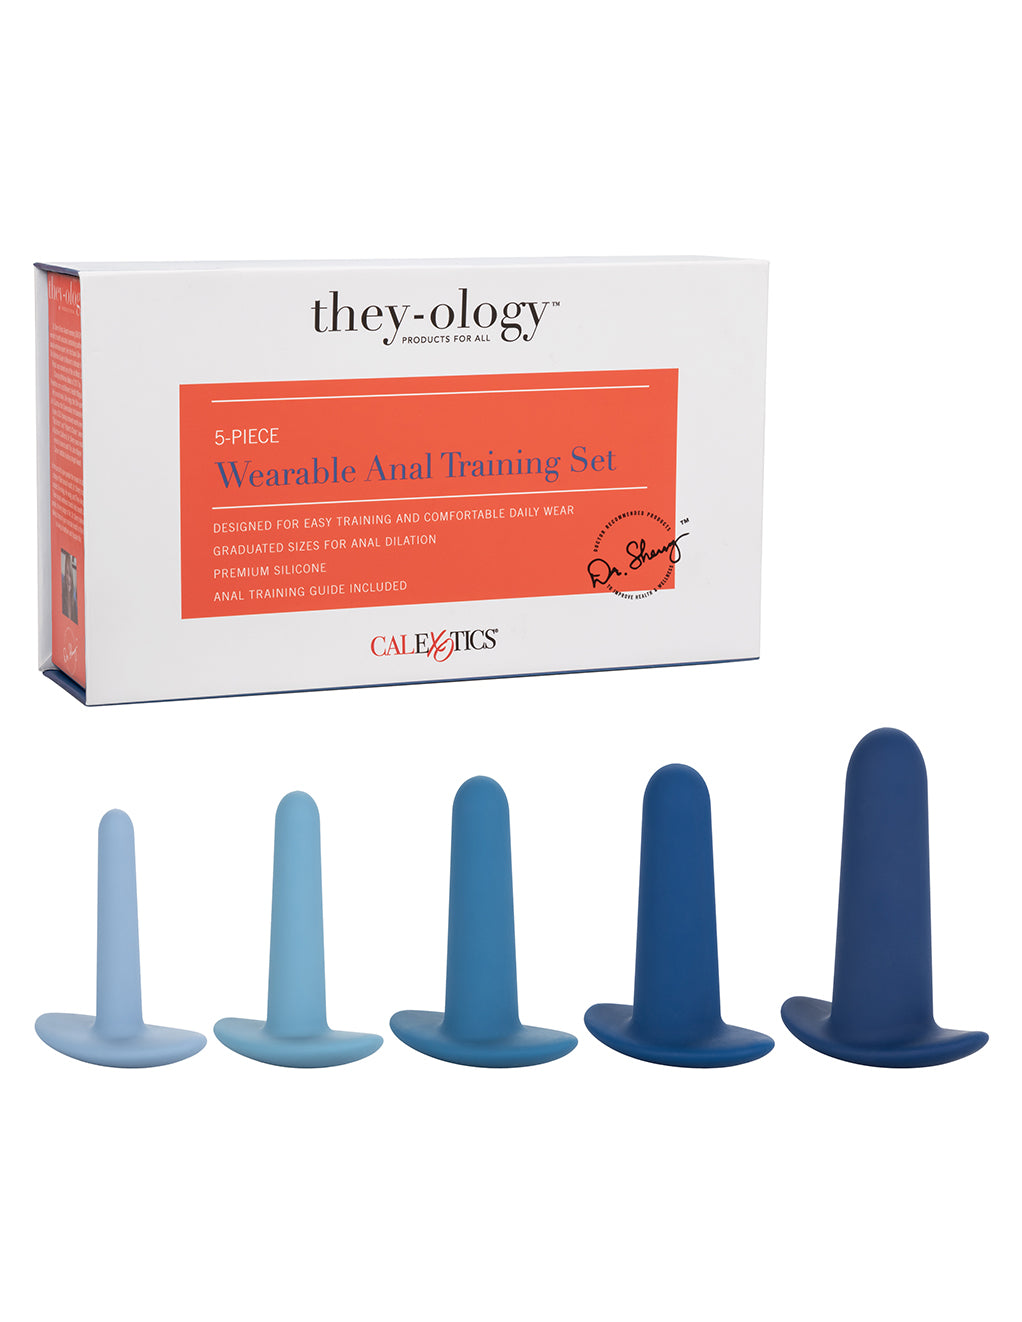 They-ology Anal Training Set- package